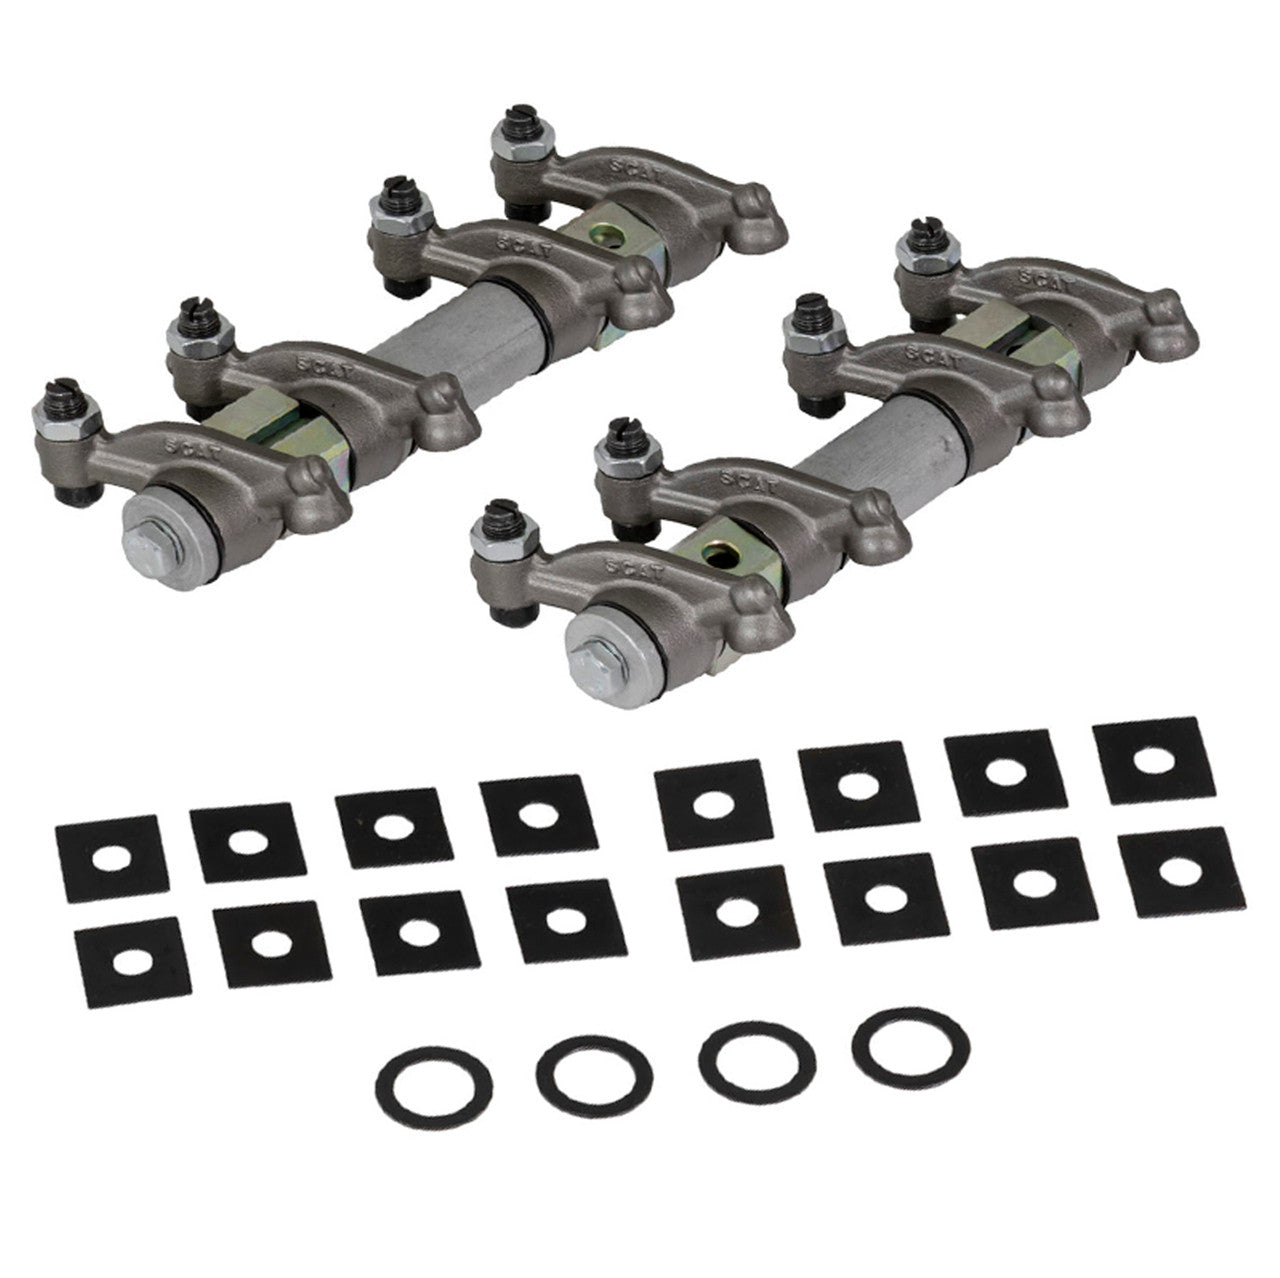 Scat 1.25 Ratio Rocker Arms With Shafts For Air-cooled Vw Engines